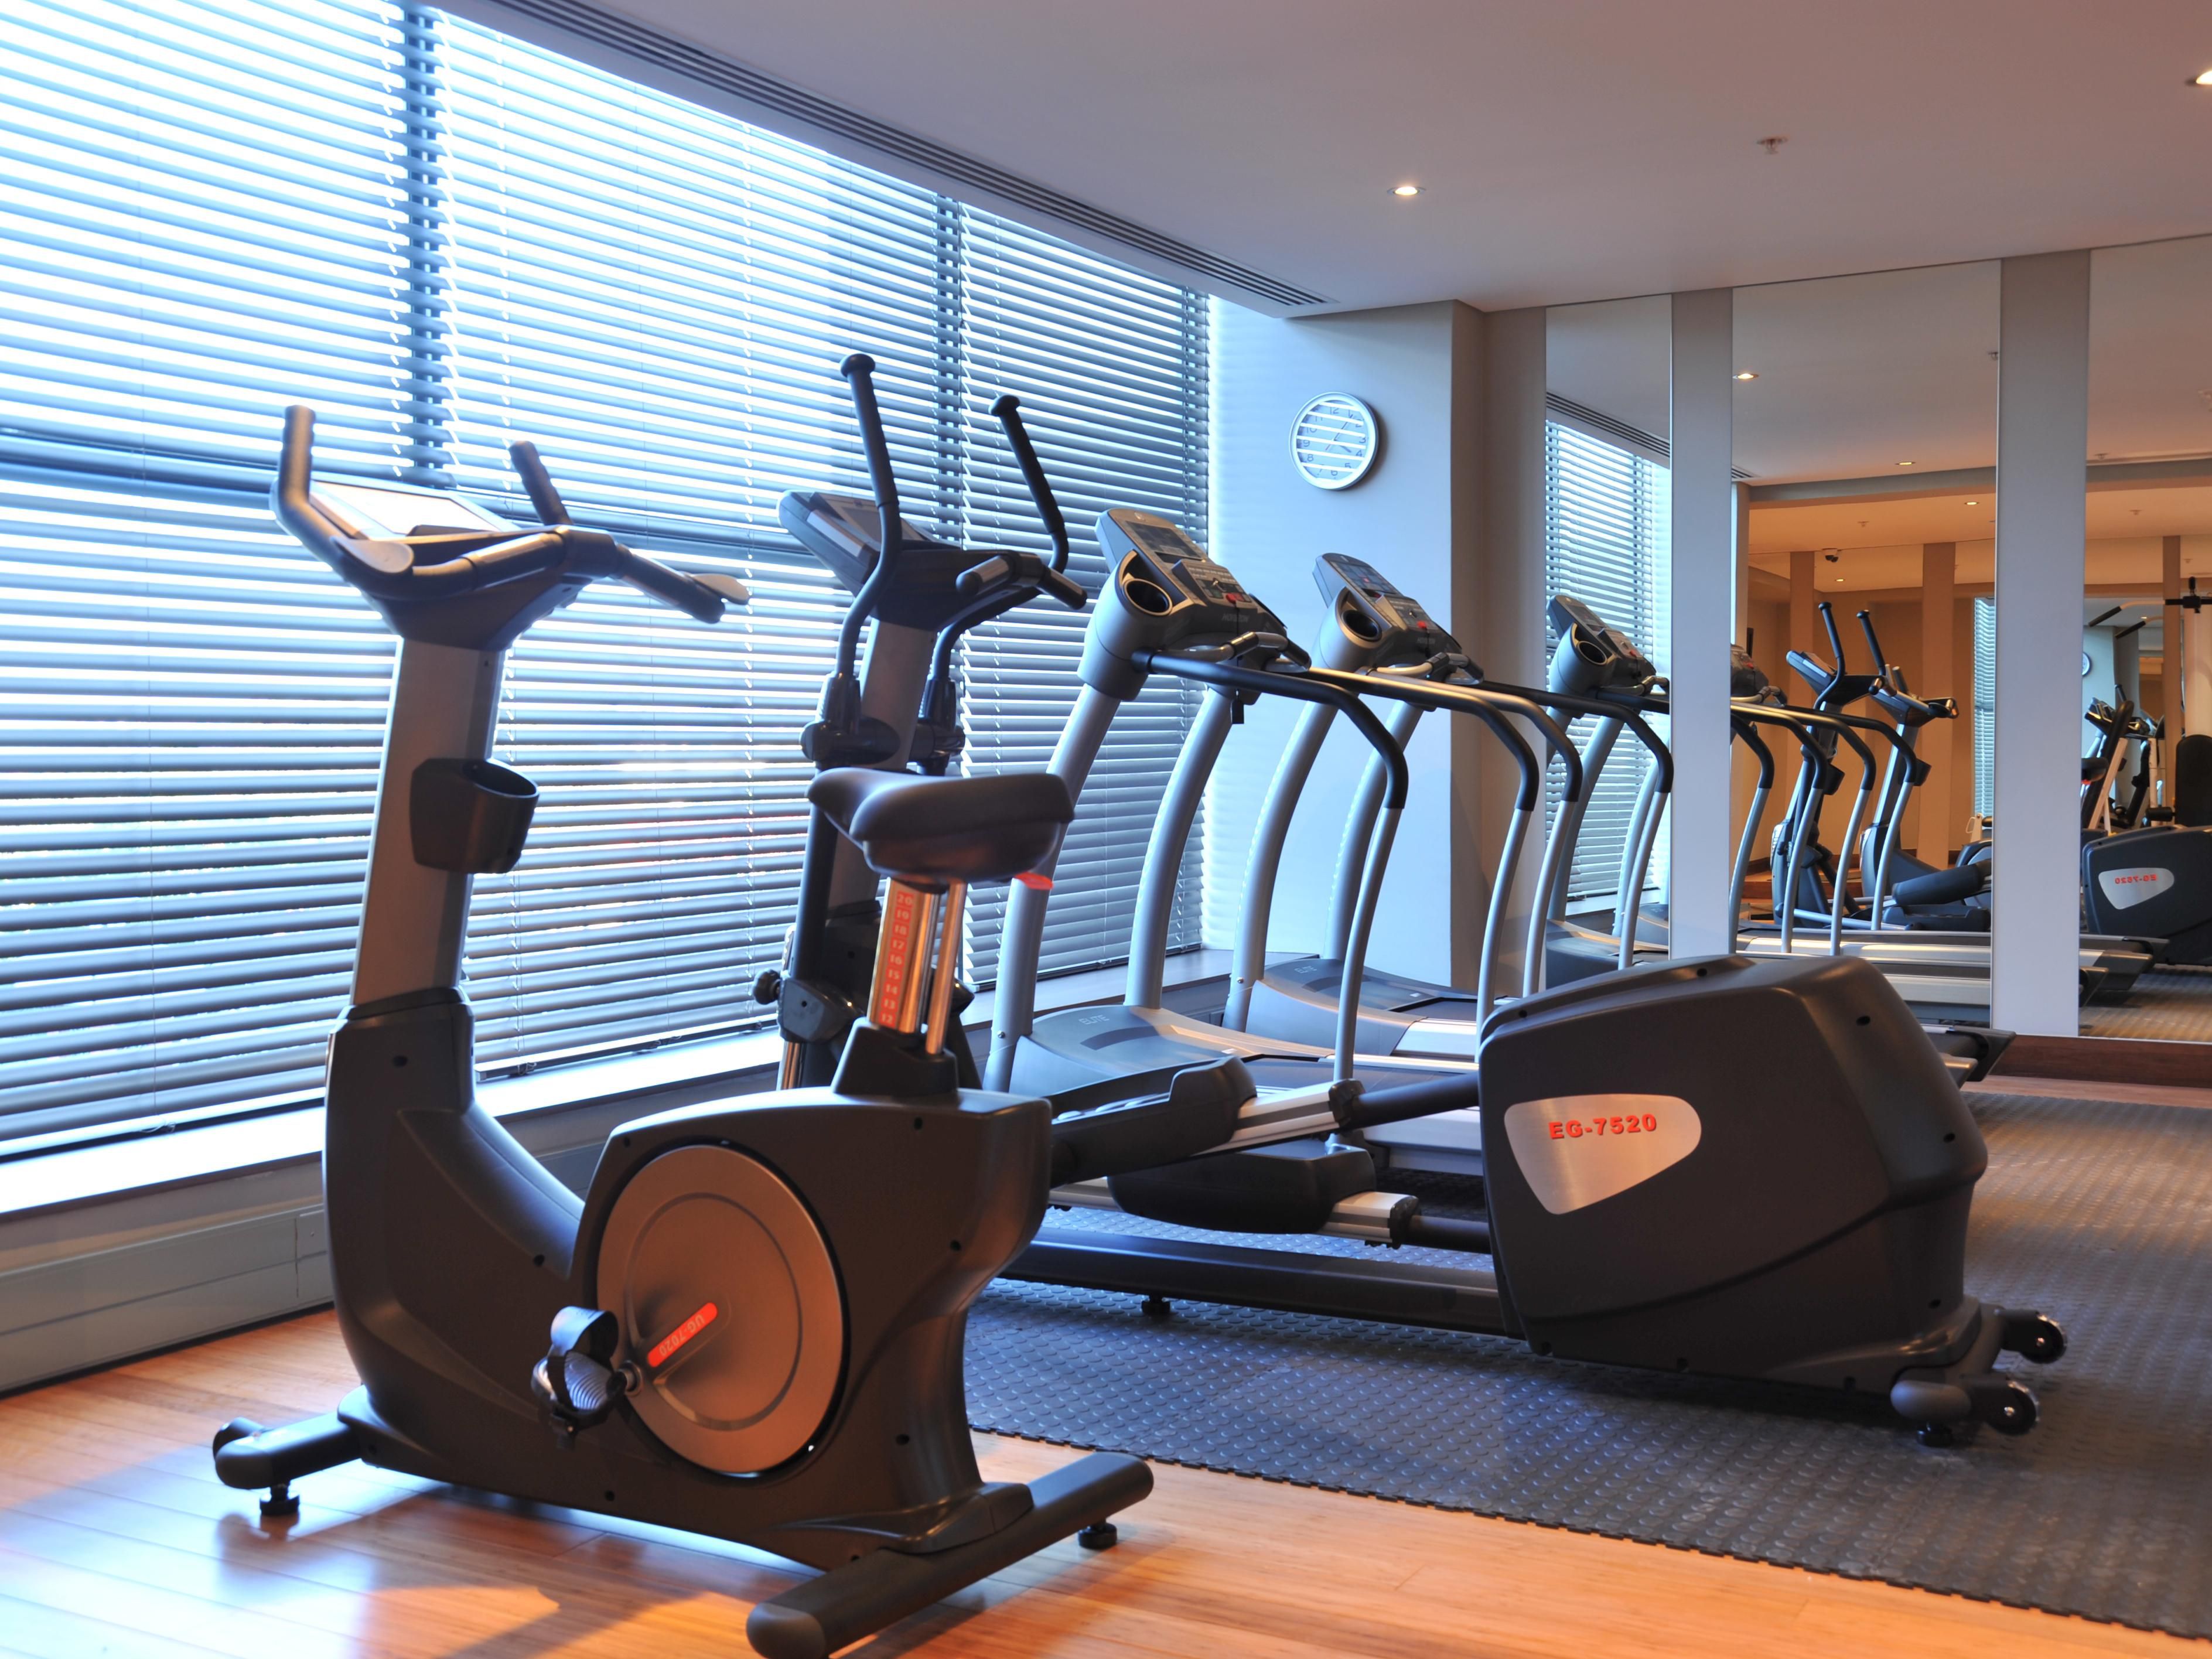 Keep up your exercise routine whilst travelling, by making use of our Mini Gymnasium, featuring treadmills, bikes,  orbital trainer and a weights. Our gym is open 24 hours and accessible using your room key card.